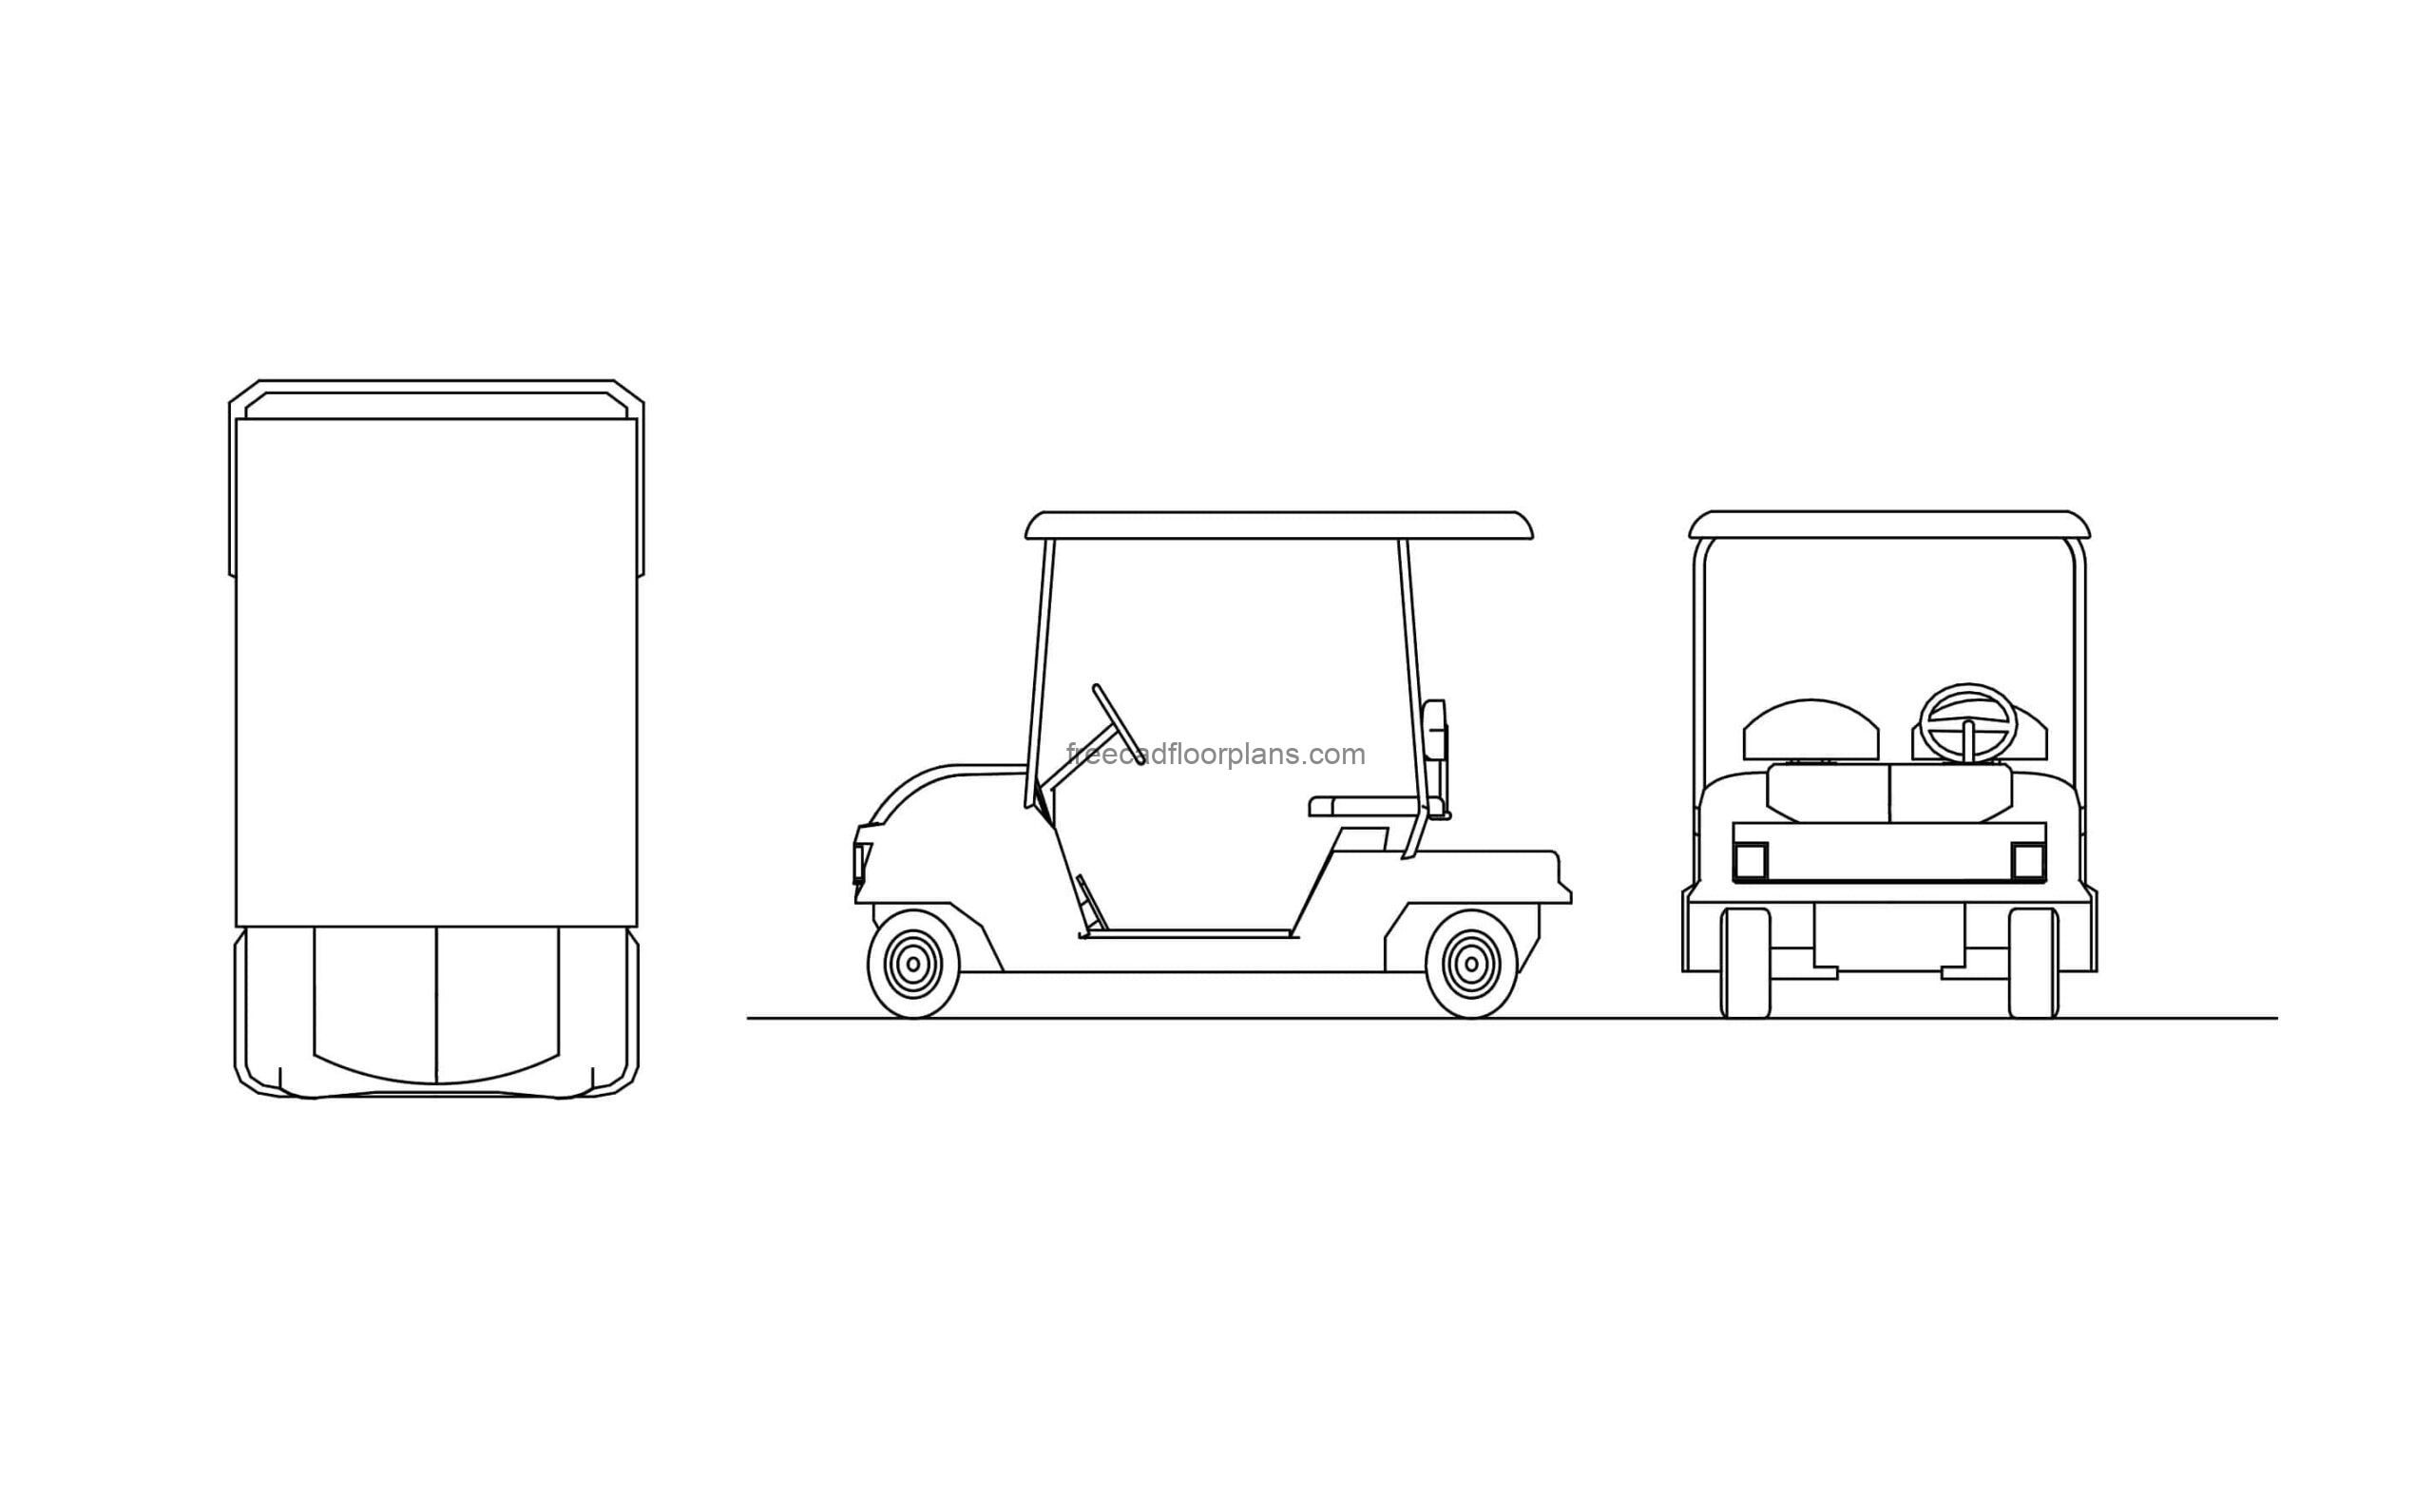 golf cart autocad drawing 2d plan and elevations dwg file for free download